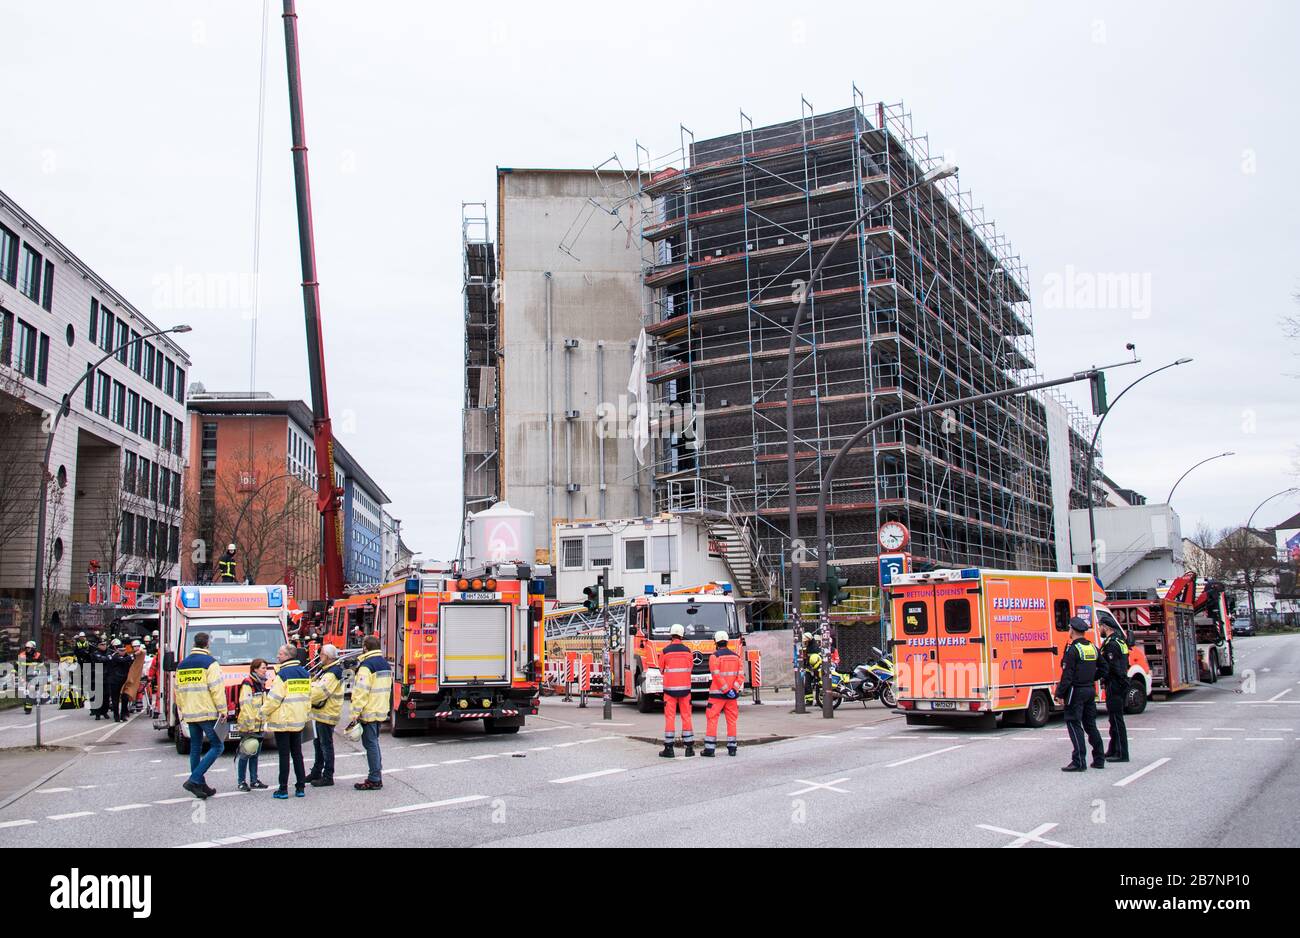 Hamburg, Germany. 17th Mar, 2020. Emergency services of the fire brigade and police secure a collapsed scaffold at a construction site. At Hamburg's Millerntorplatz on Tuesday afternoon, scaffolding toppled over and buried two people underneath. Credit: Daniel Bockwoldt/dpa/Alamy Live News Stock Photo